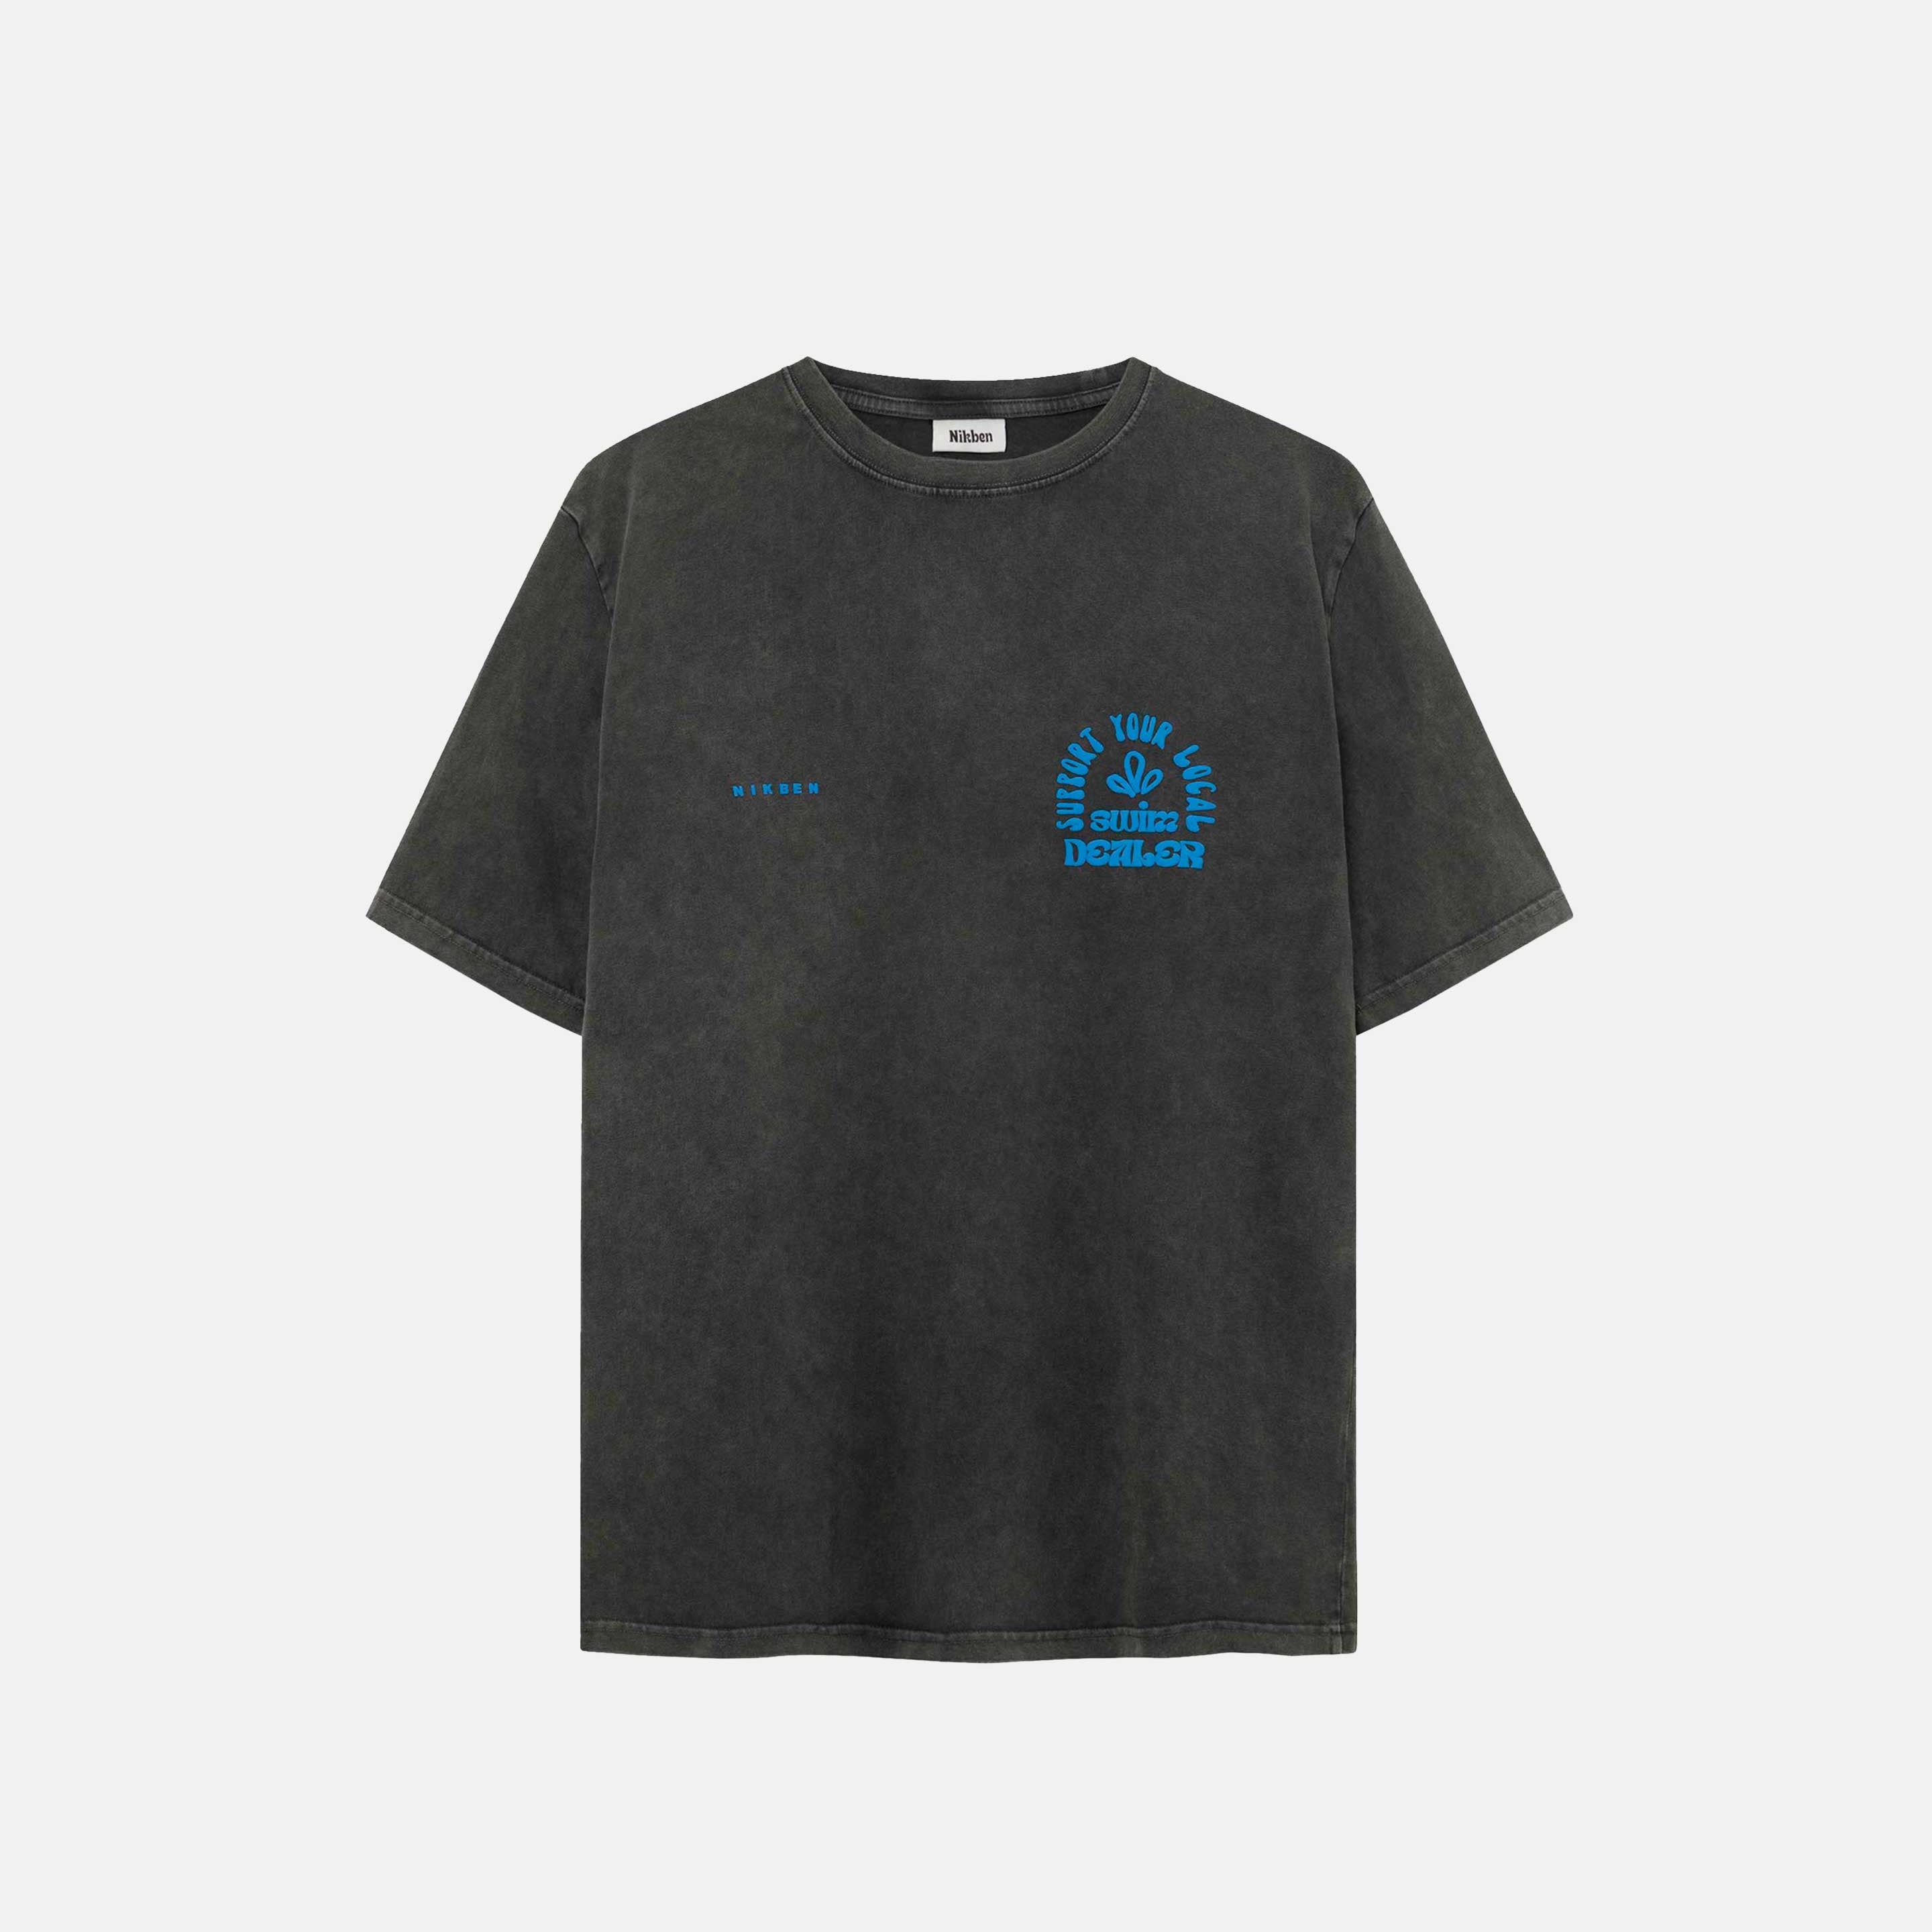 Washed black t-shirt with blue puffy print on the chest.